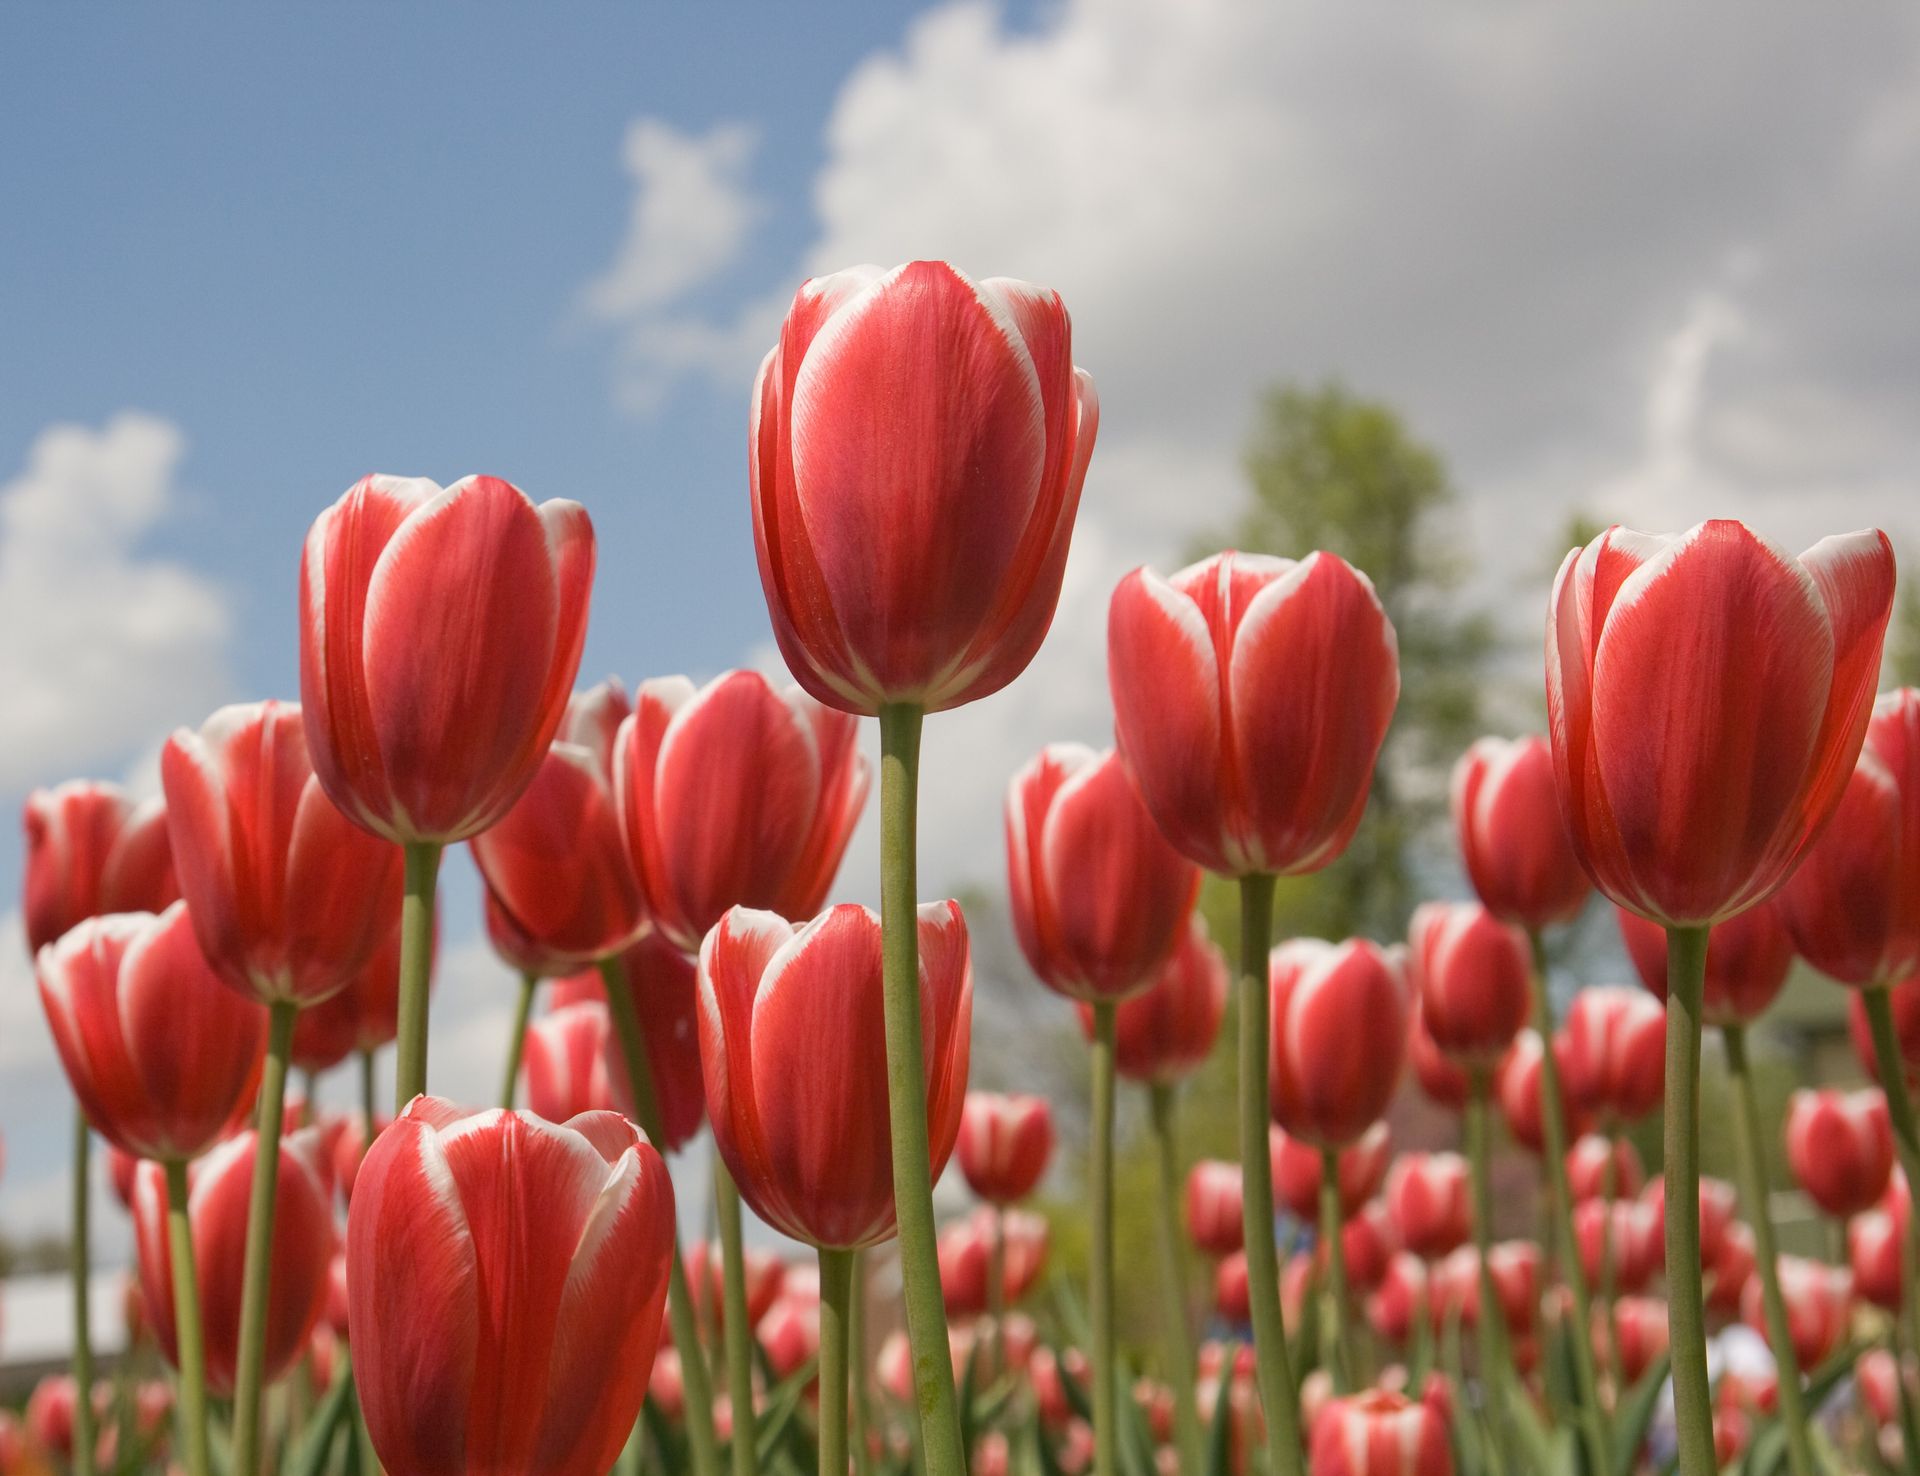 Red tulips bloom in the spring.